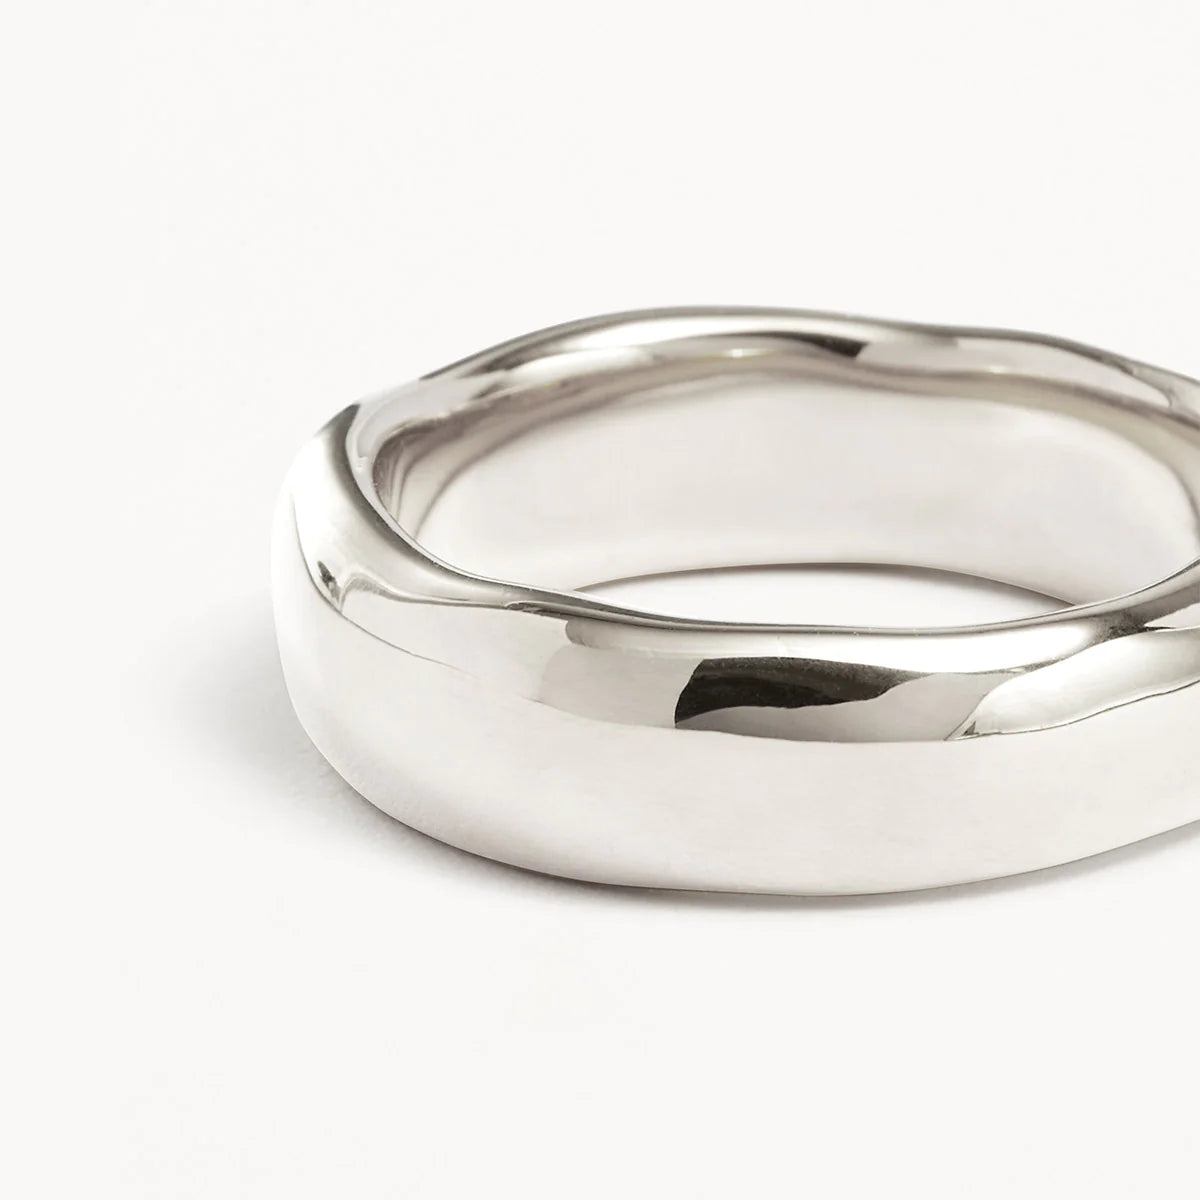 BY CHARLOTTE | LOVER BOLD RING - SILVER